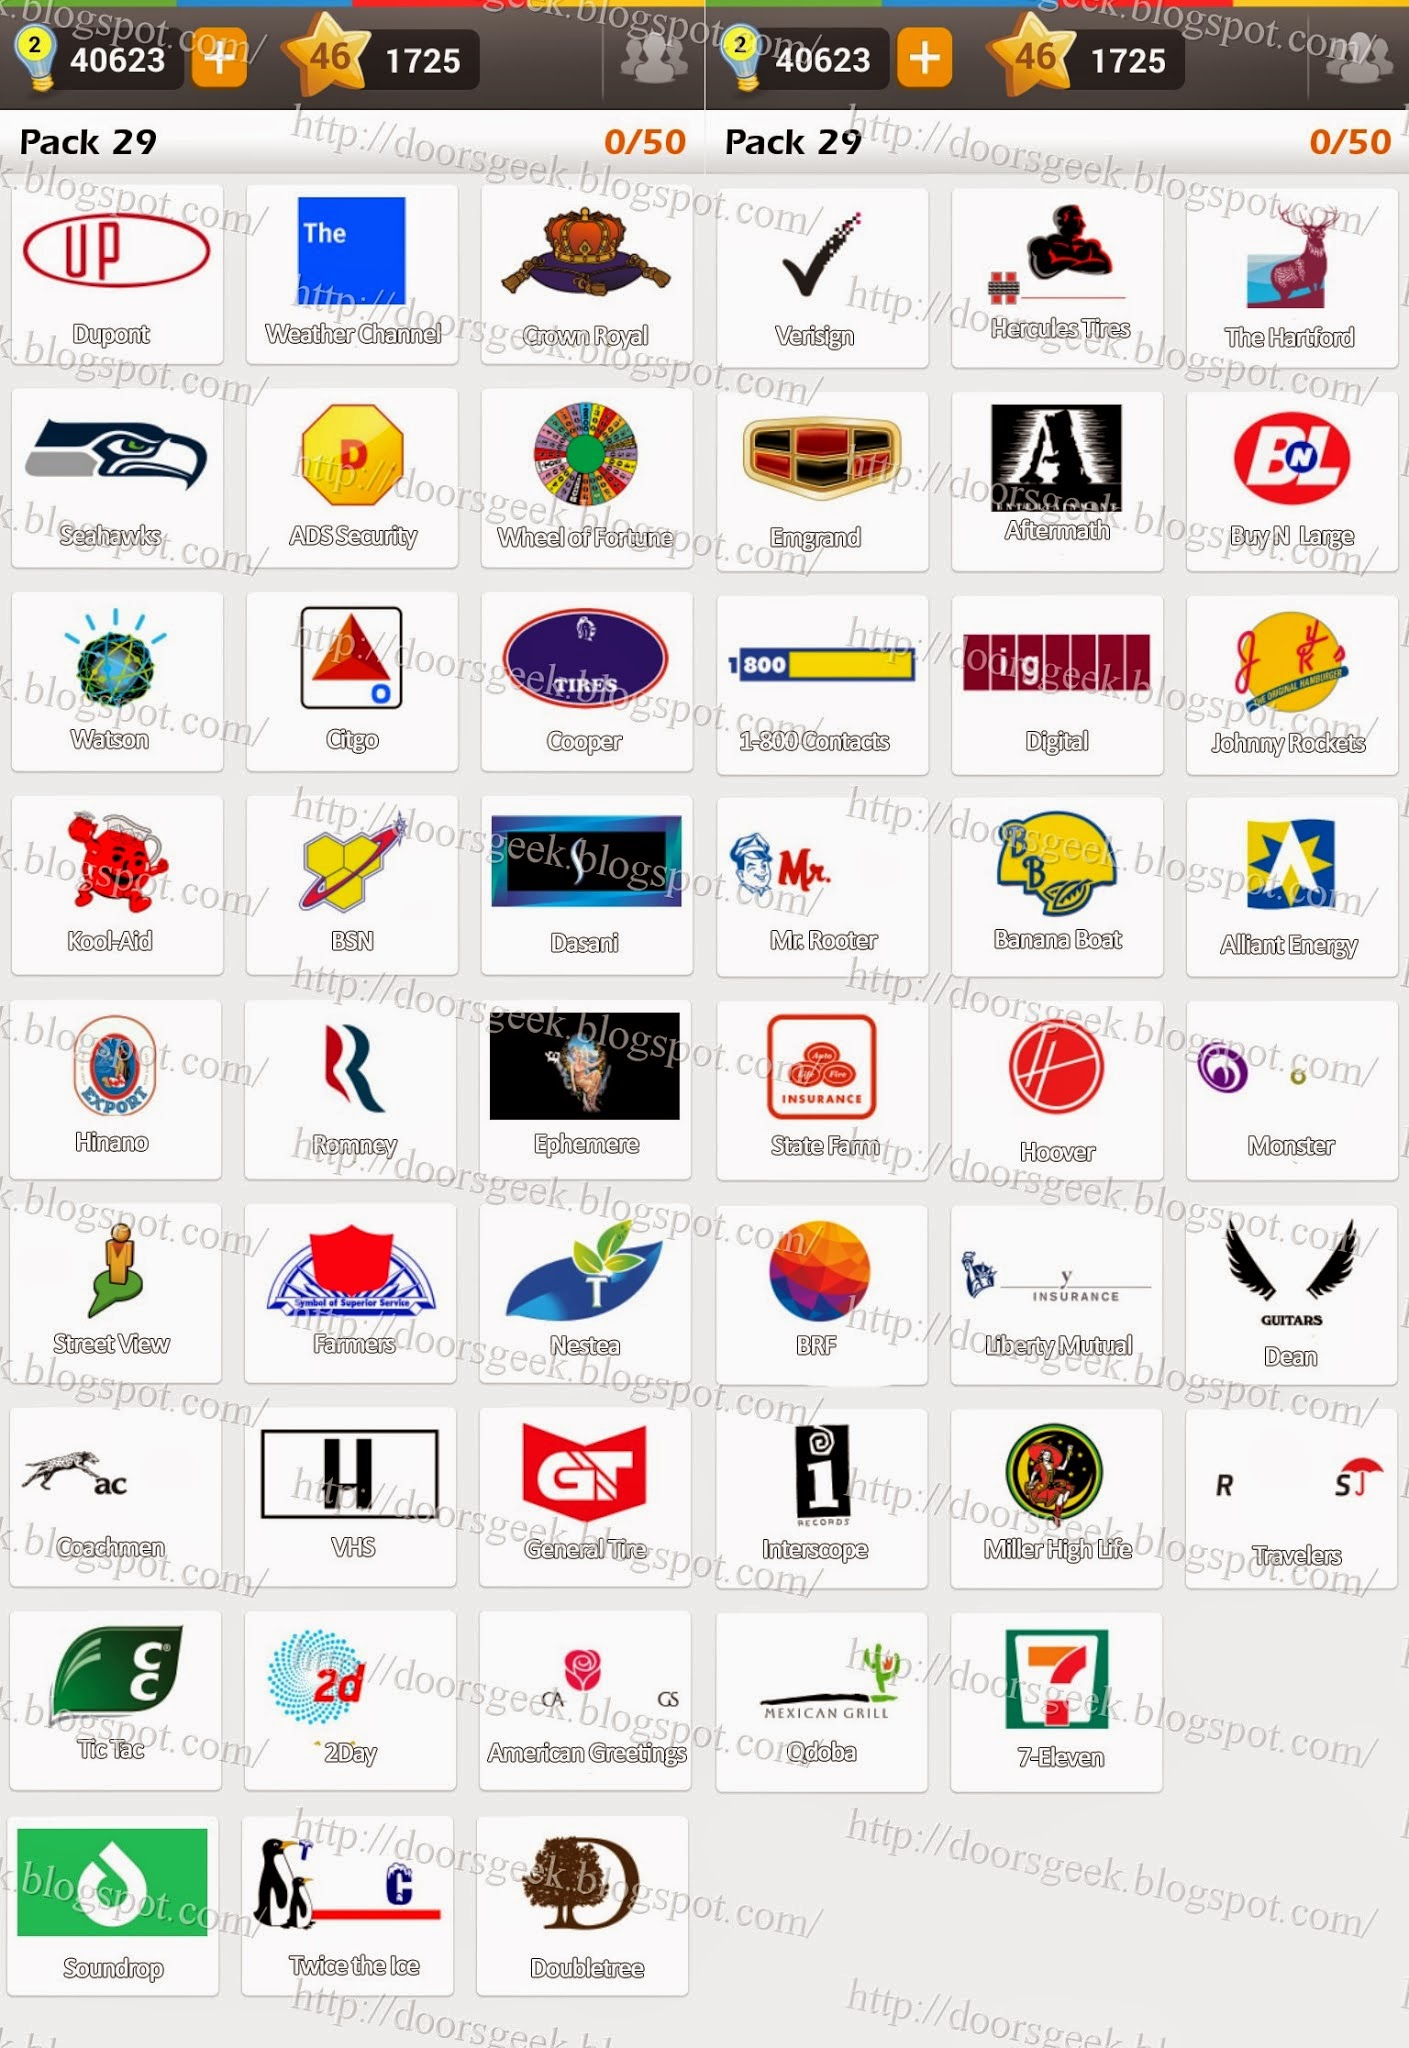 Picture Quiz: Logos – Game Answers Level 1 To Level 19